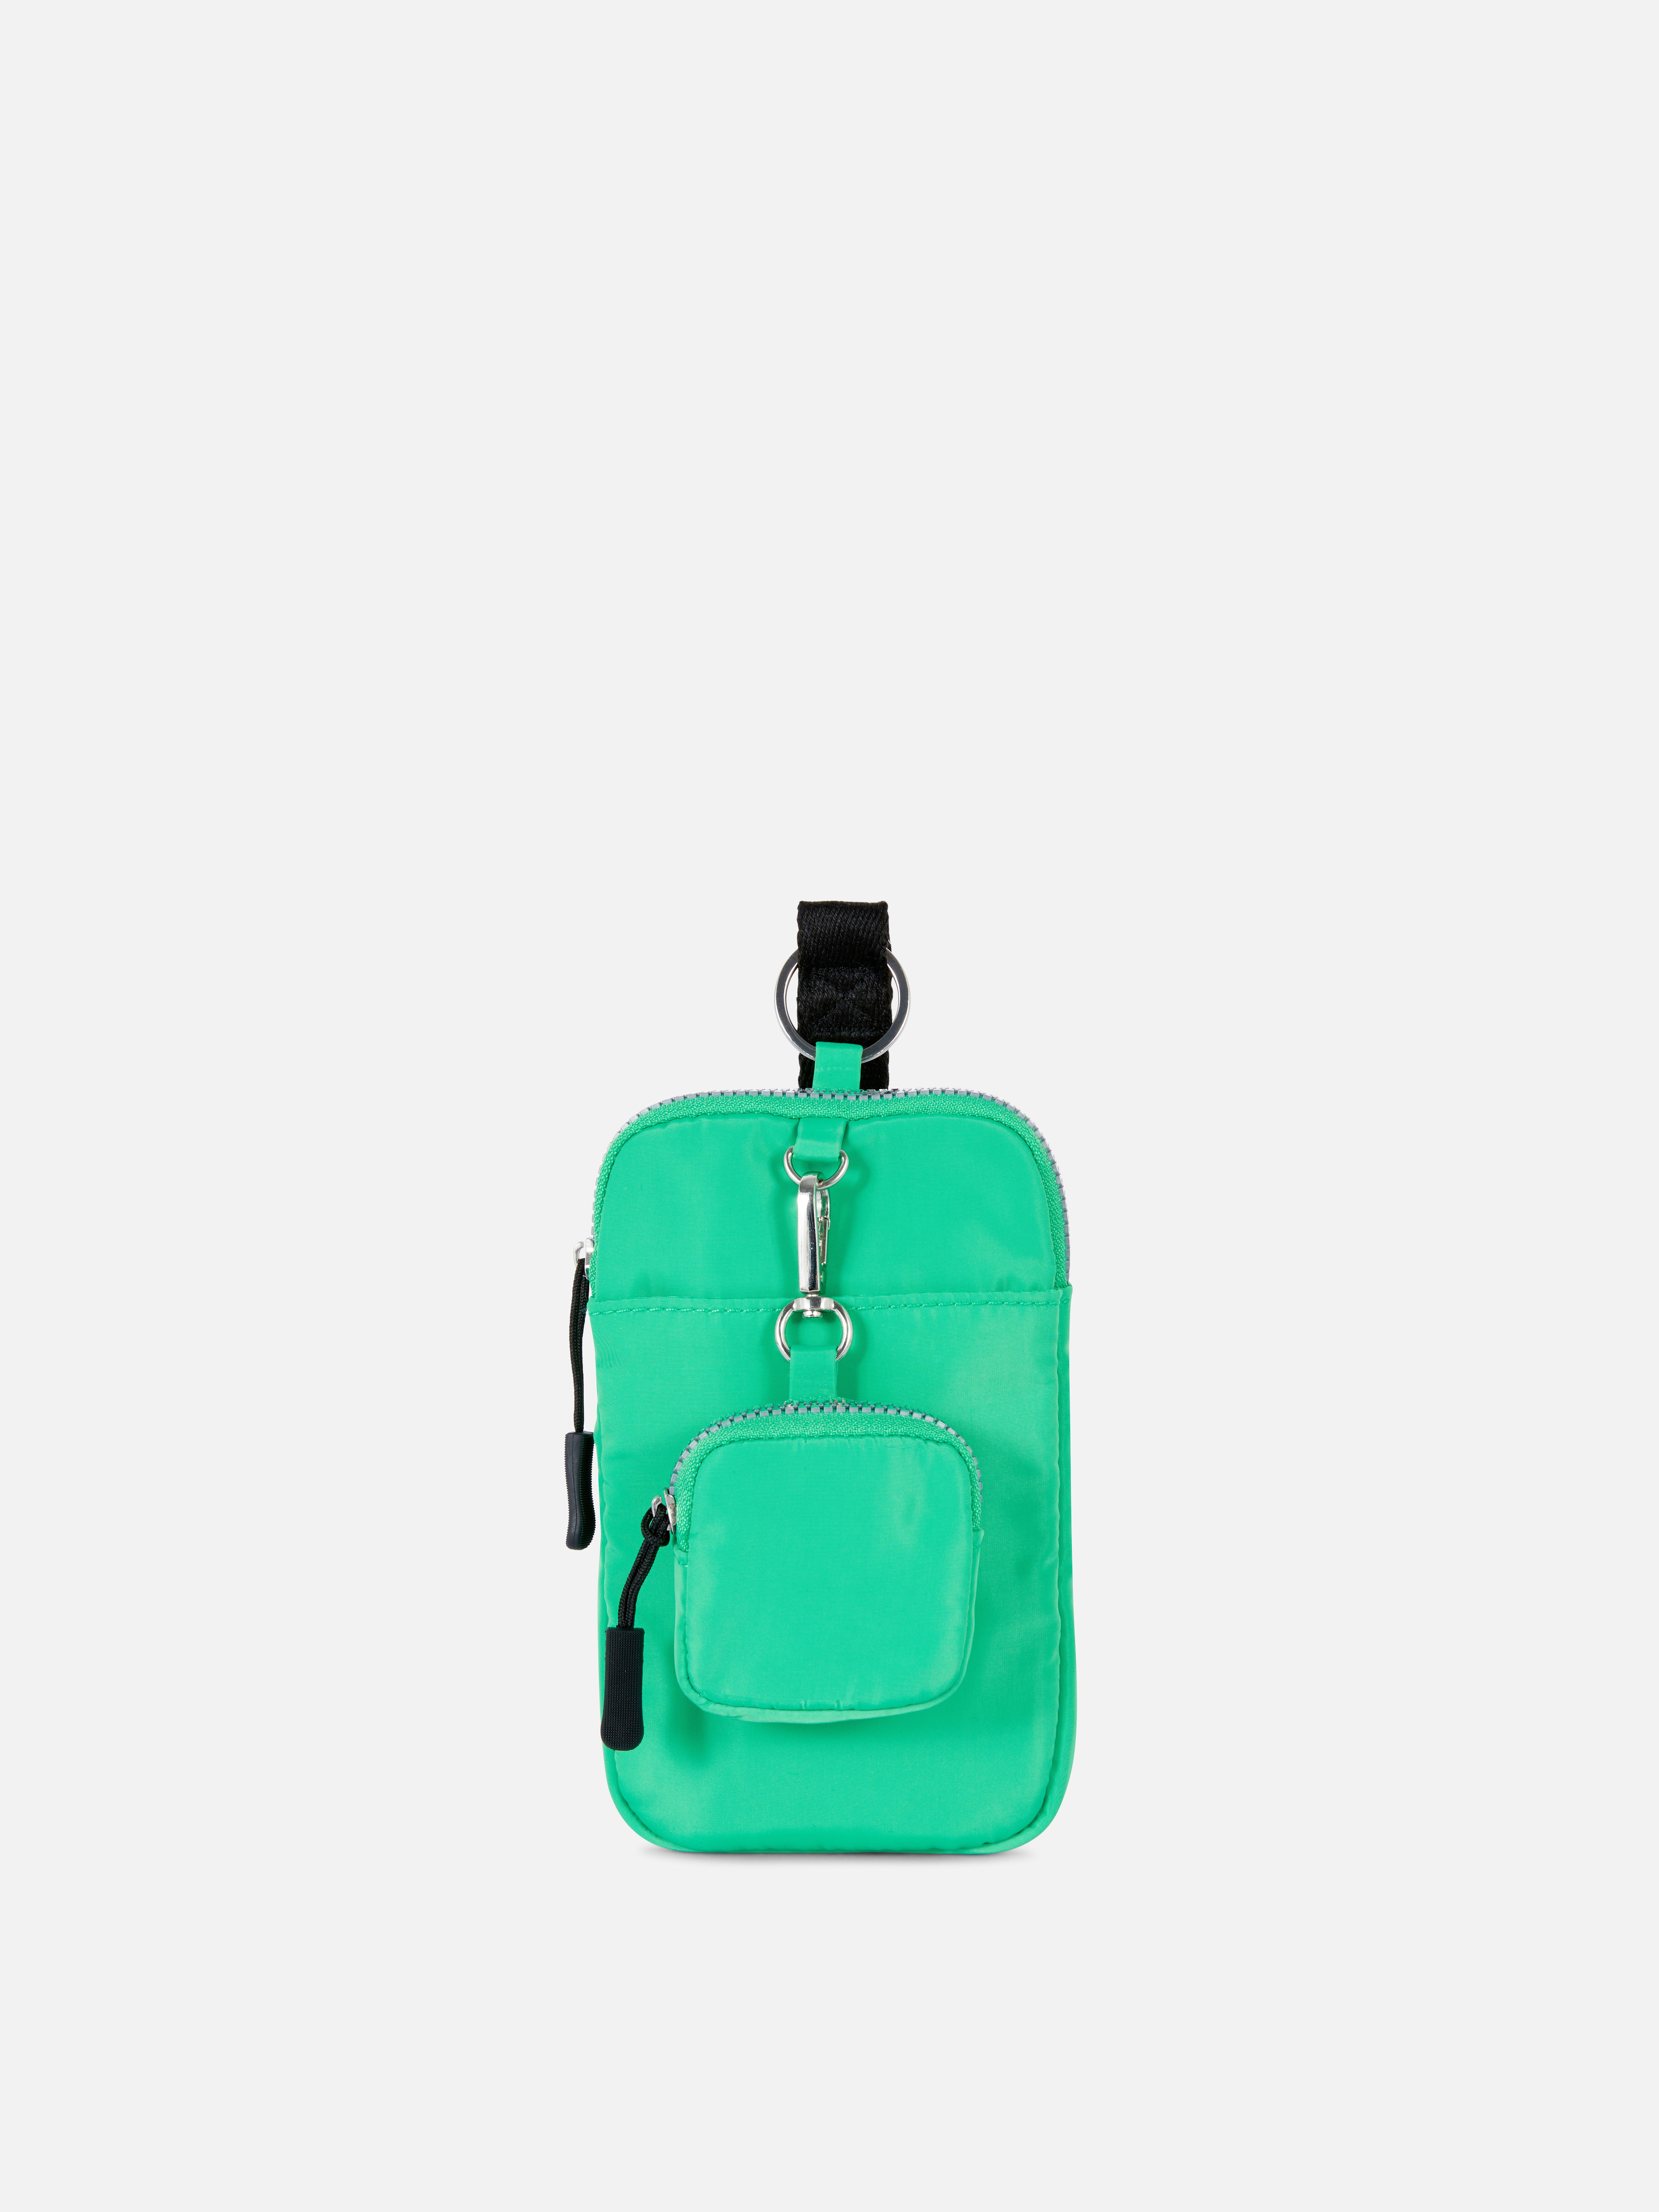 Mobile Phone Pouch Bag Green